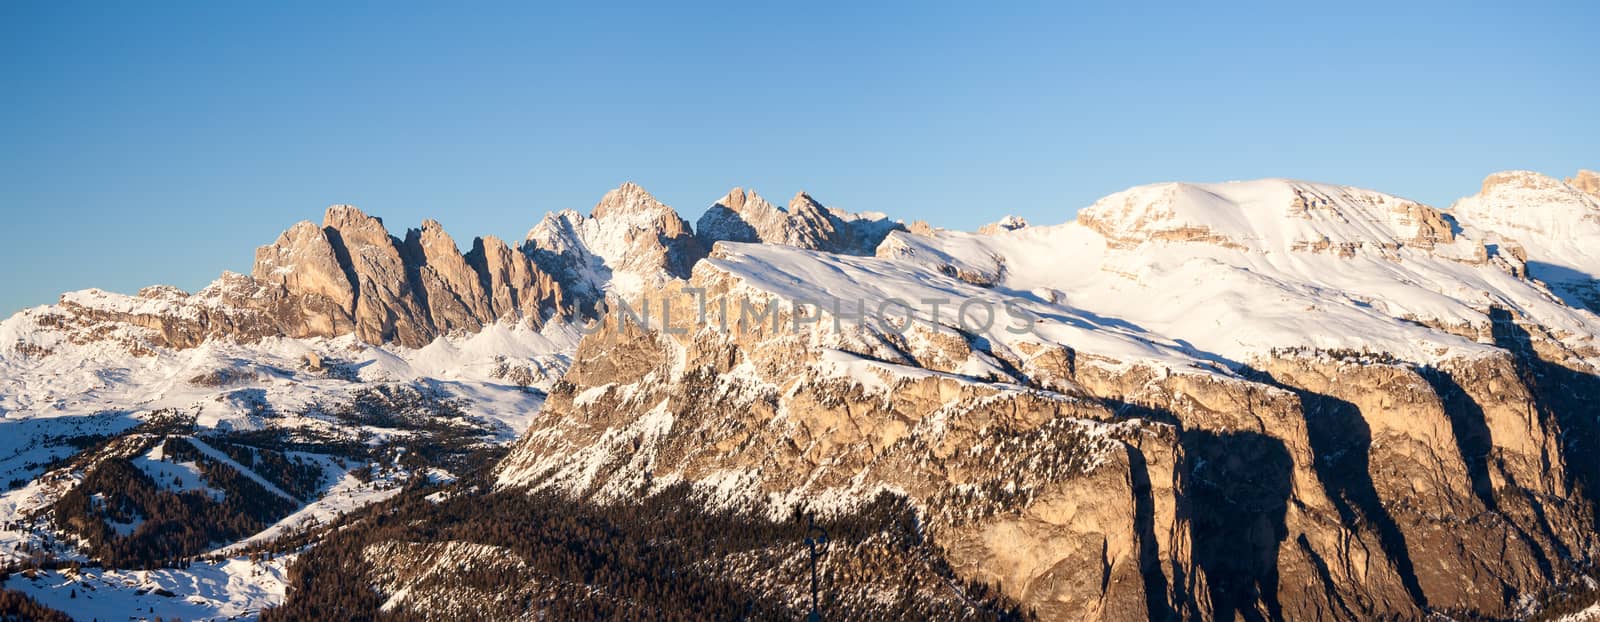 Dolomites winter panorama at the sunset (Alps, Italy)